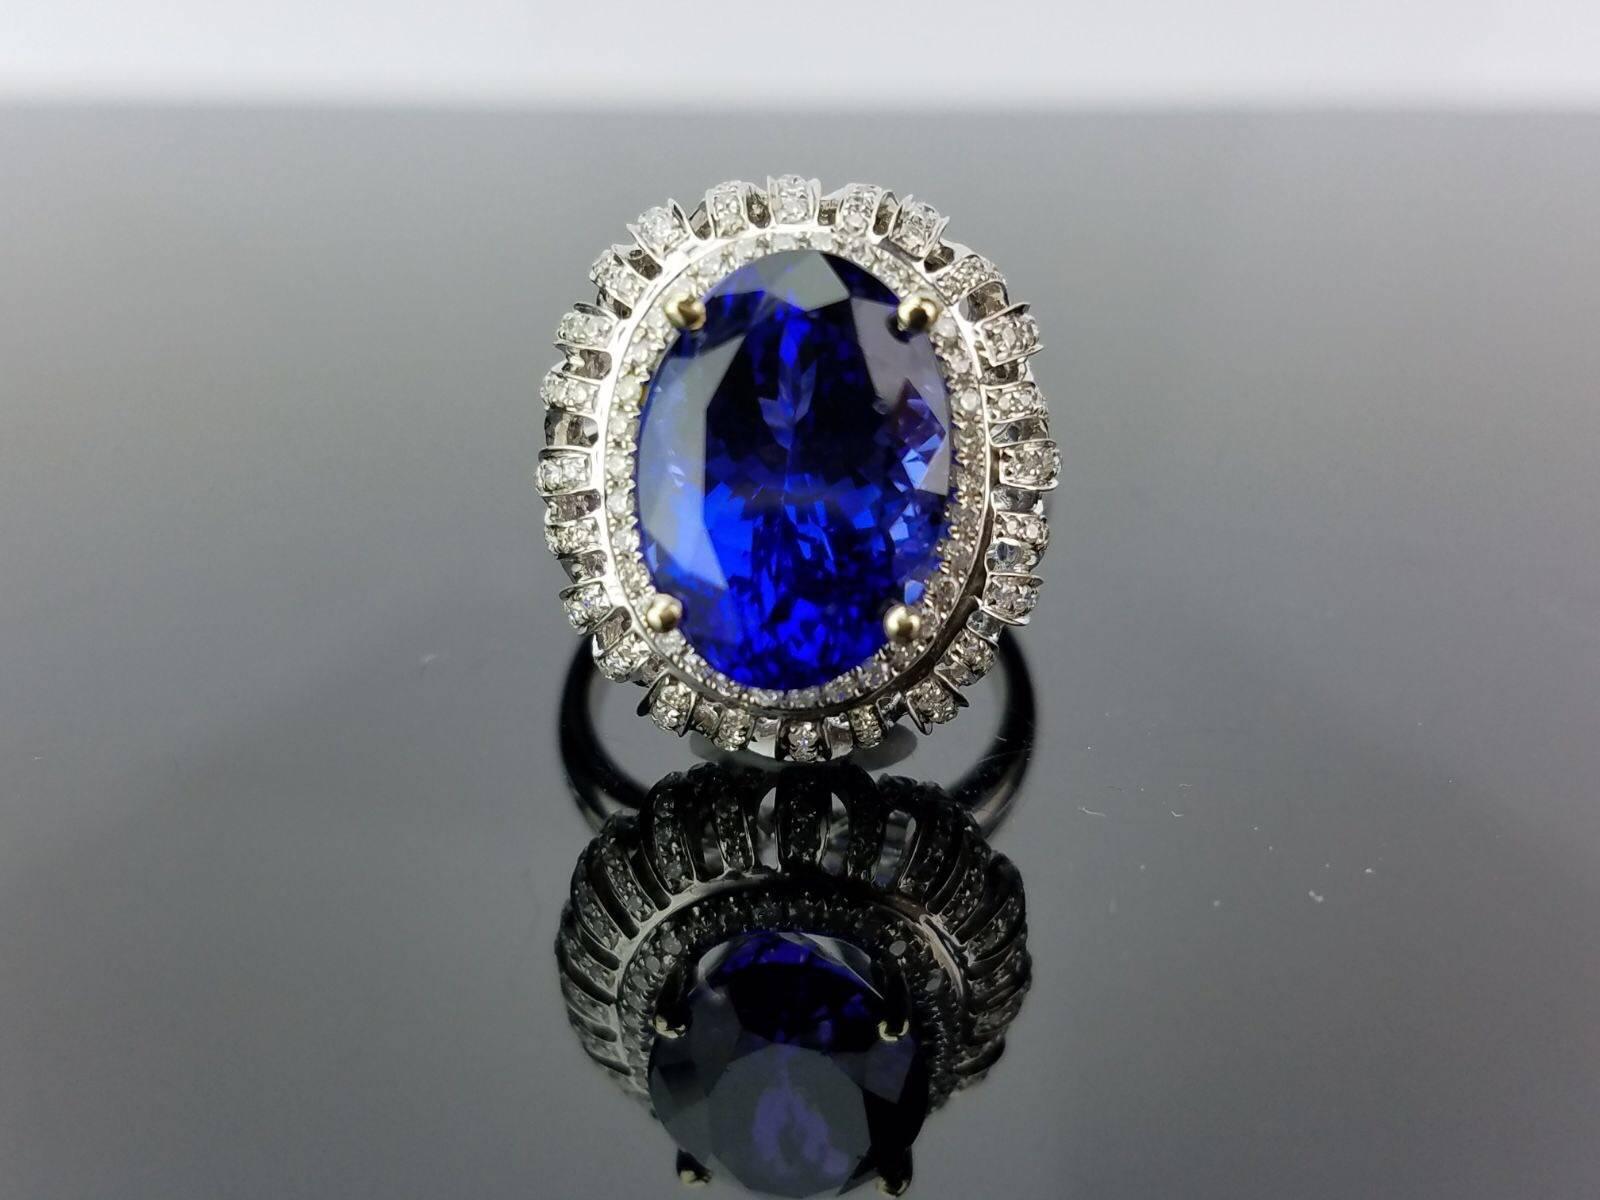 A beautiful oval Tanzanite without any inclusions and White Diamond cocktail ring, all set 18K white gold. 

Stone Details: 
Stone: Tanzanite
Carat Weight: 10.78 Carat

Diamond Details:
Total Carat Weight: 0.802 carat
Quality: VS/SI , H/I

18K Gold: